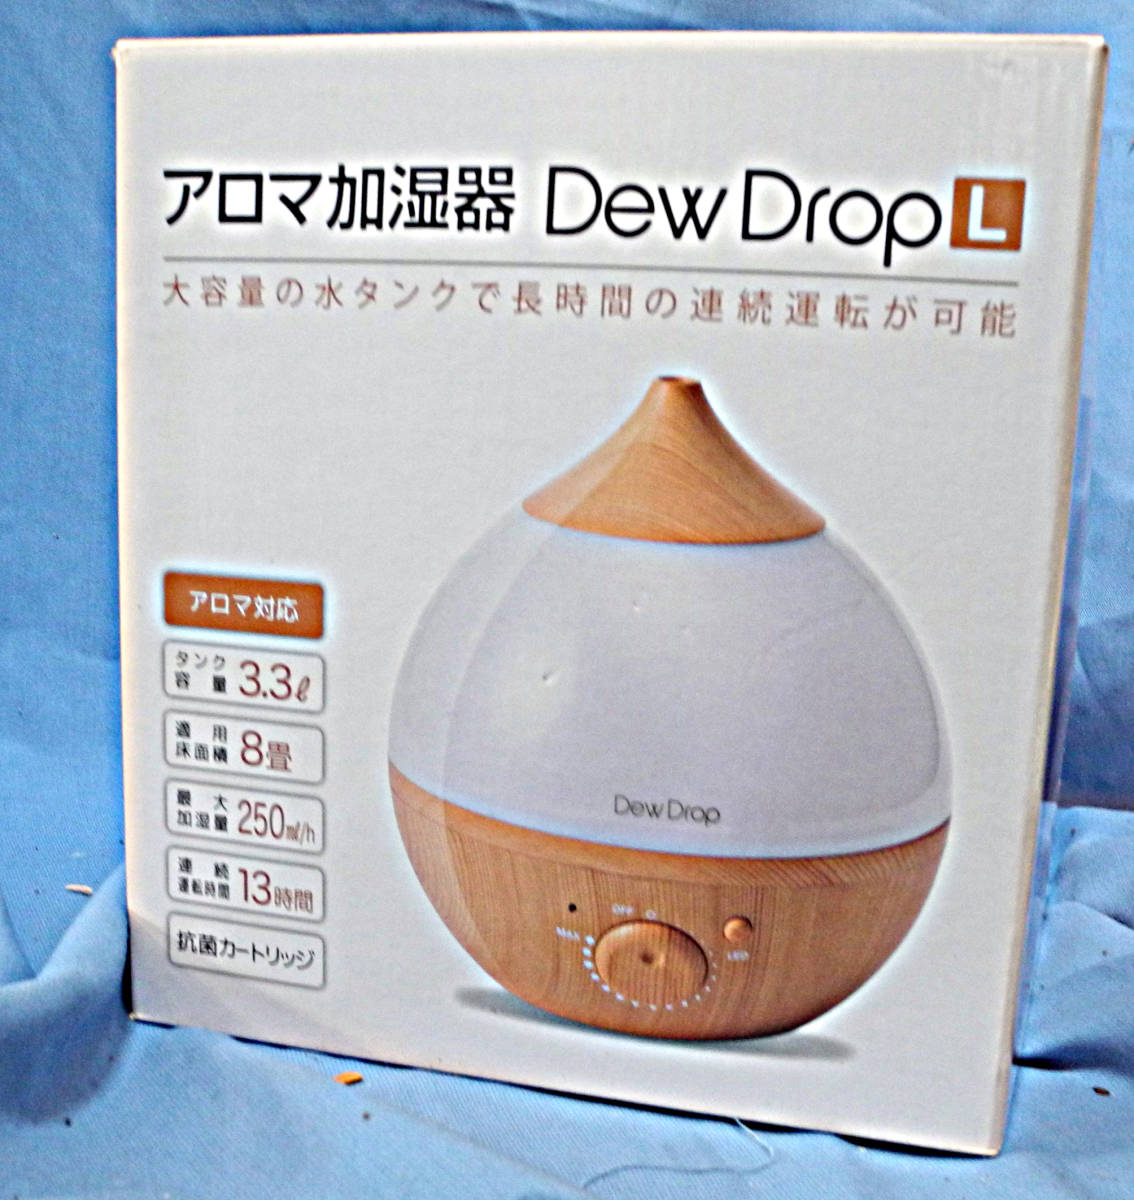 s Lee up hybrid type ( heating + ultrasound ) humidifier (10 tatami till natural wood )